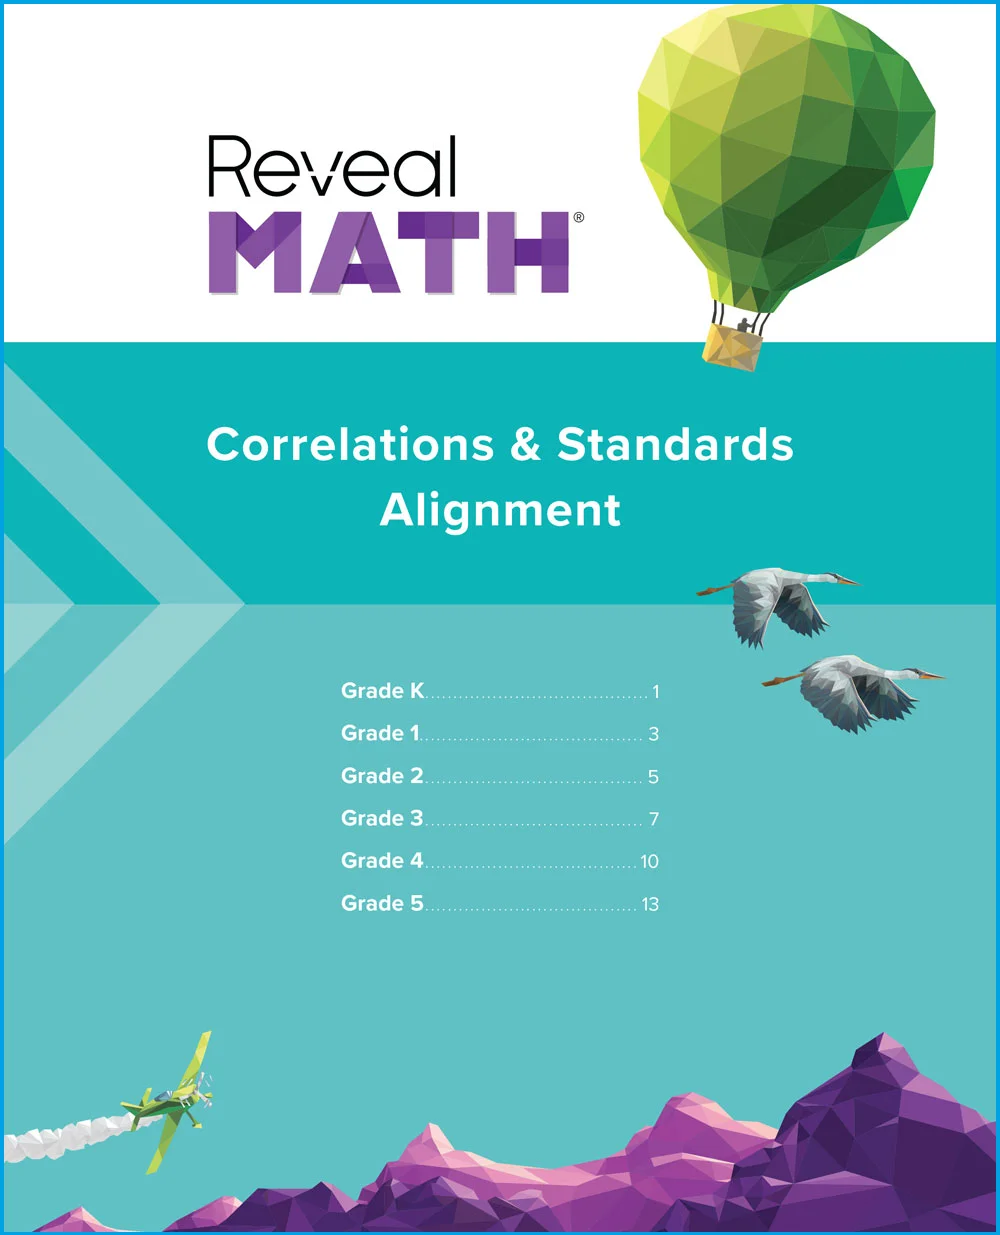 Reveal Math Correlations & Standards Alignment brochure cover